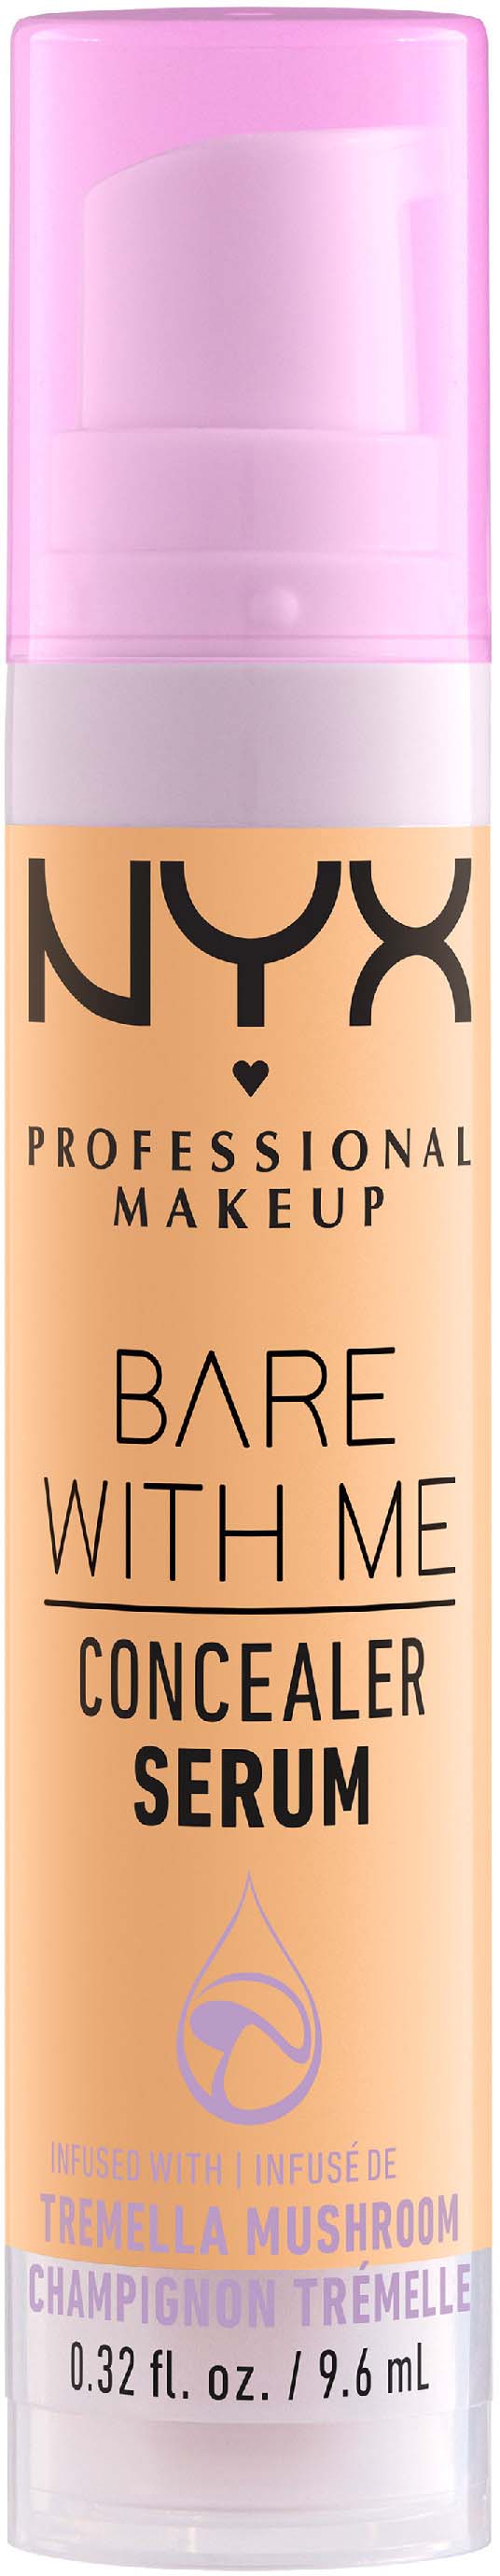 Nyx Professional Makeup Bare With Me